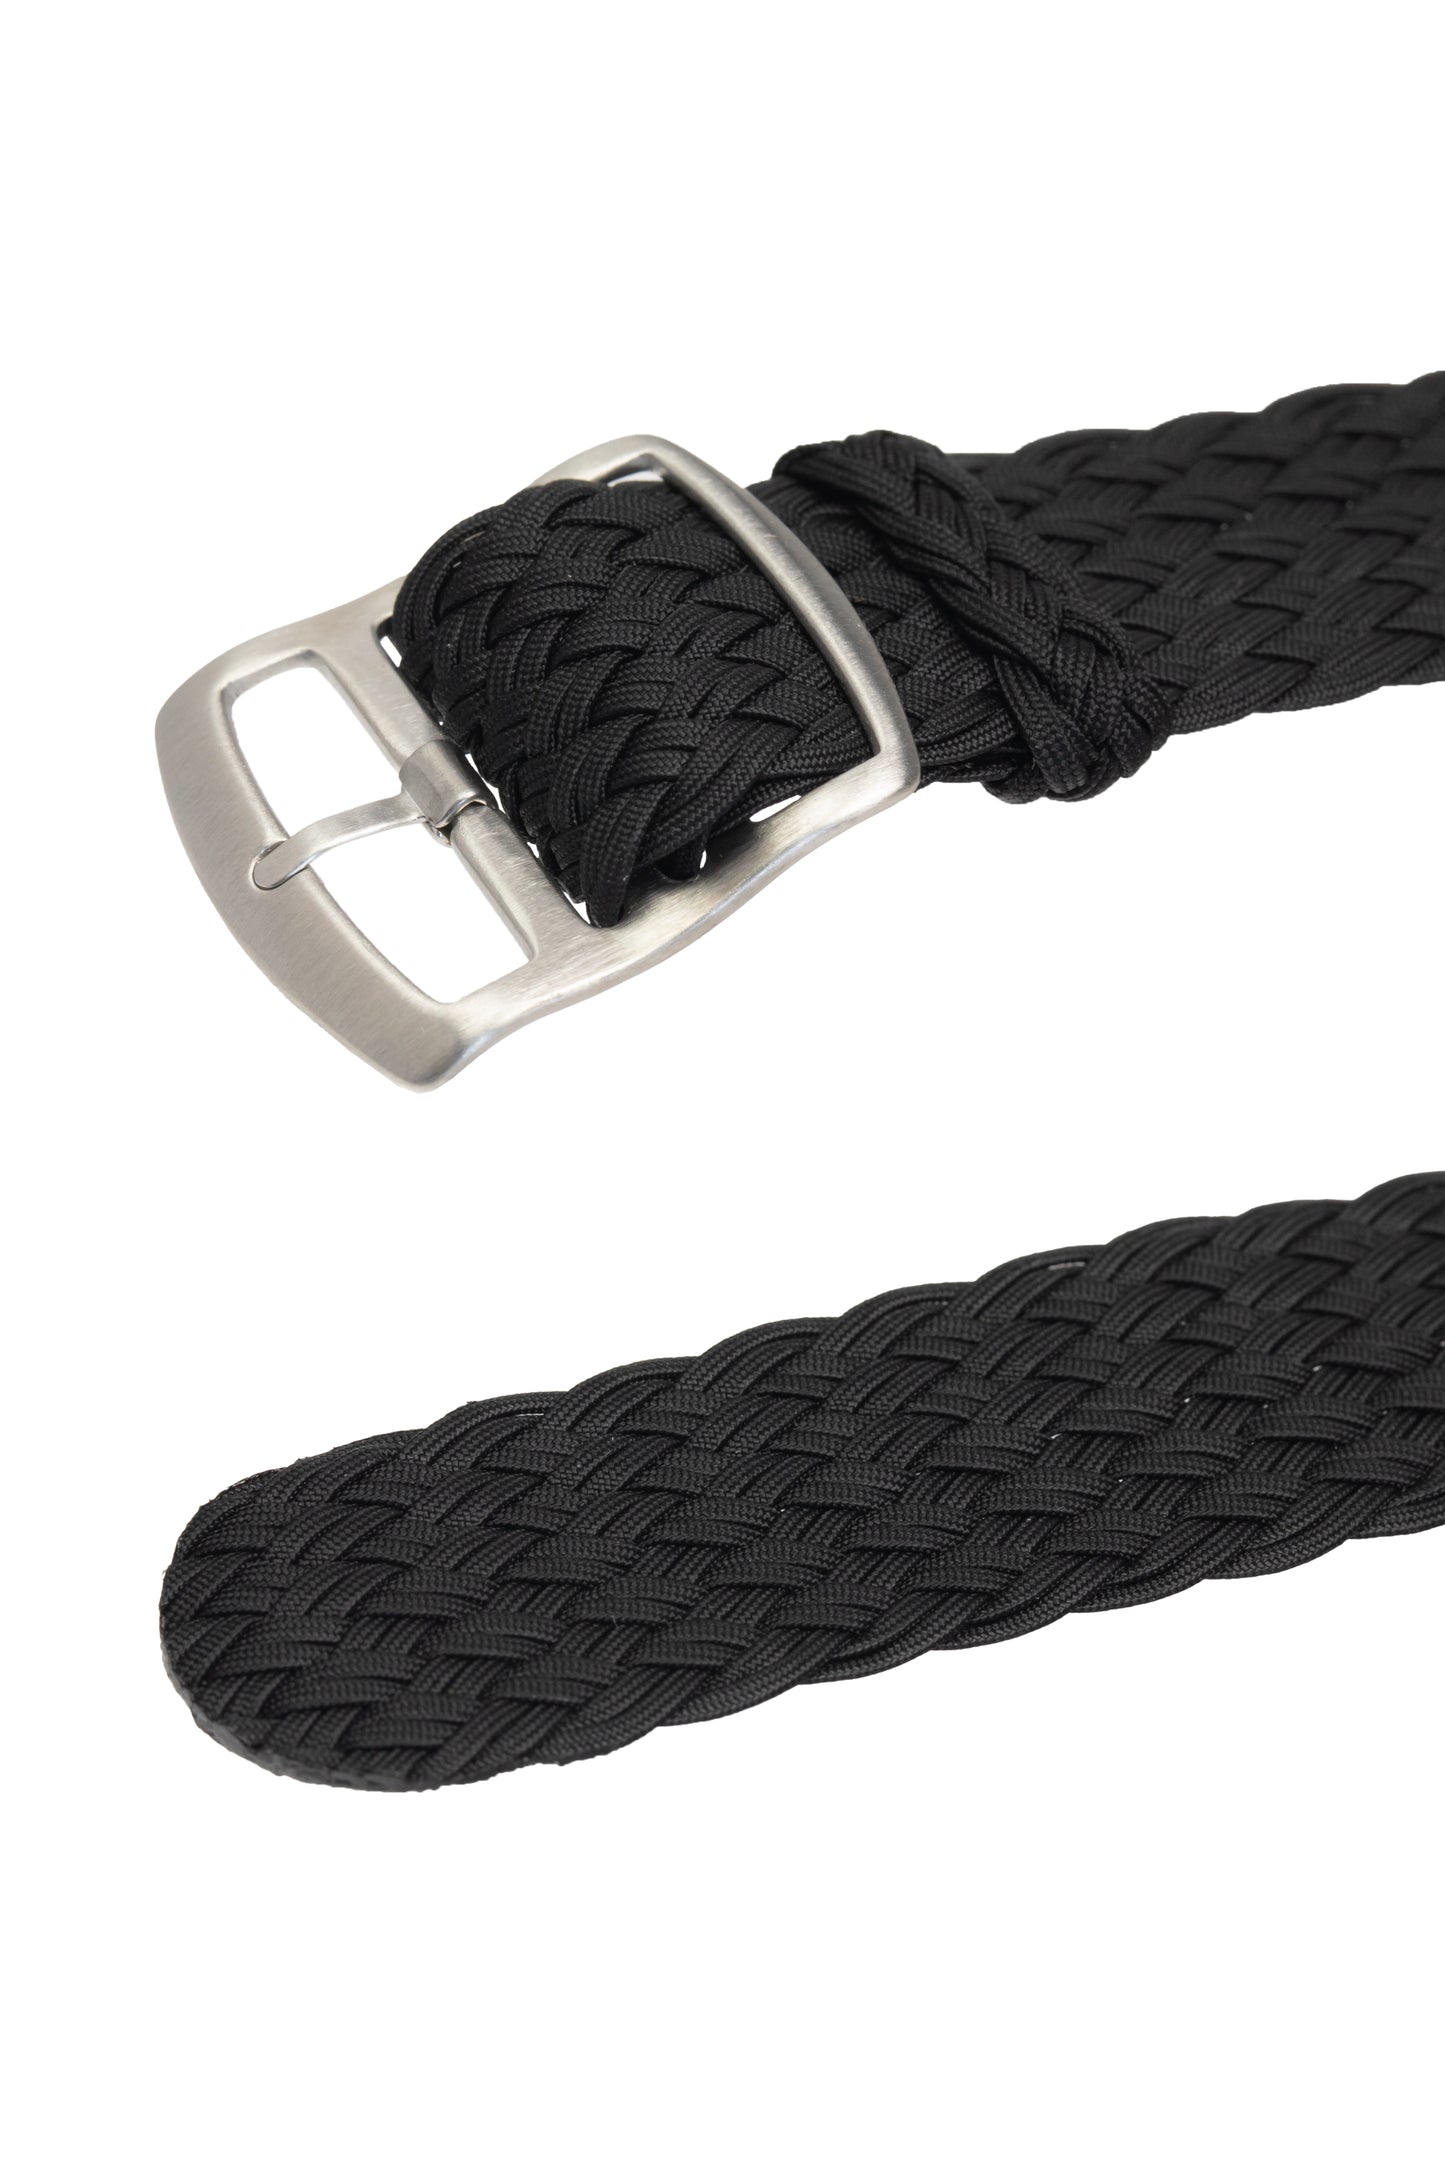 Perlon Woven Watch Strap | Order Here | Watch Obsession